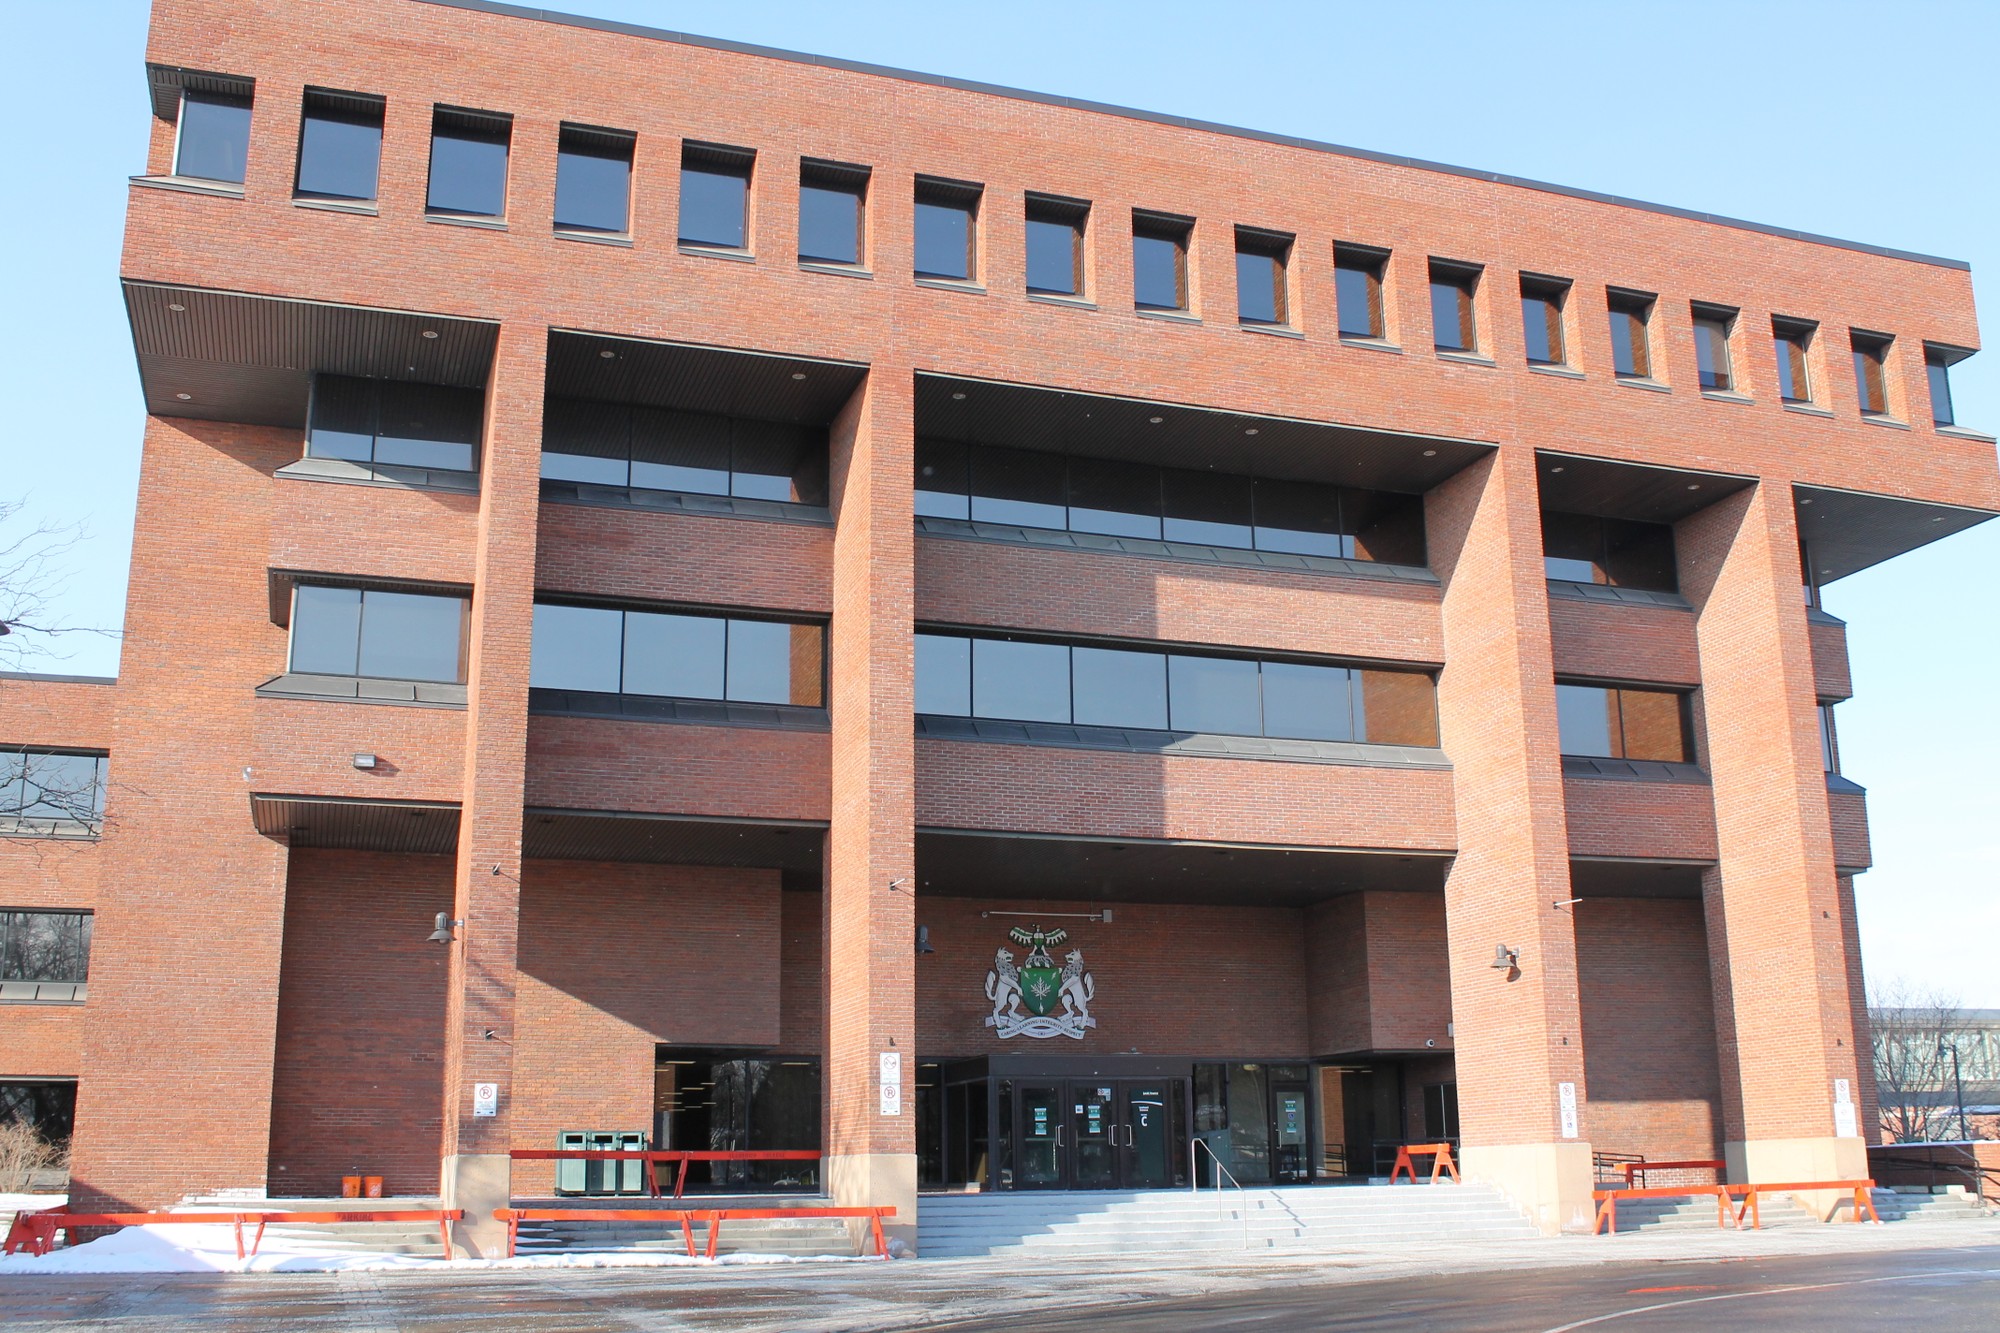 Building C at Algonquin College, the headquarters of the Board of Governors.